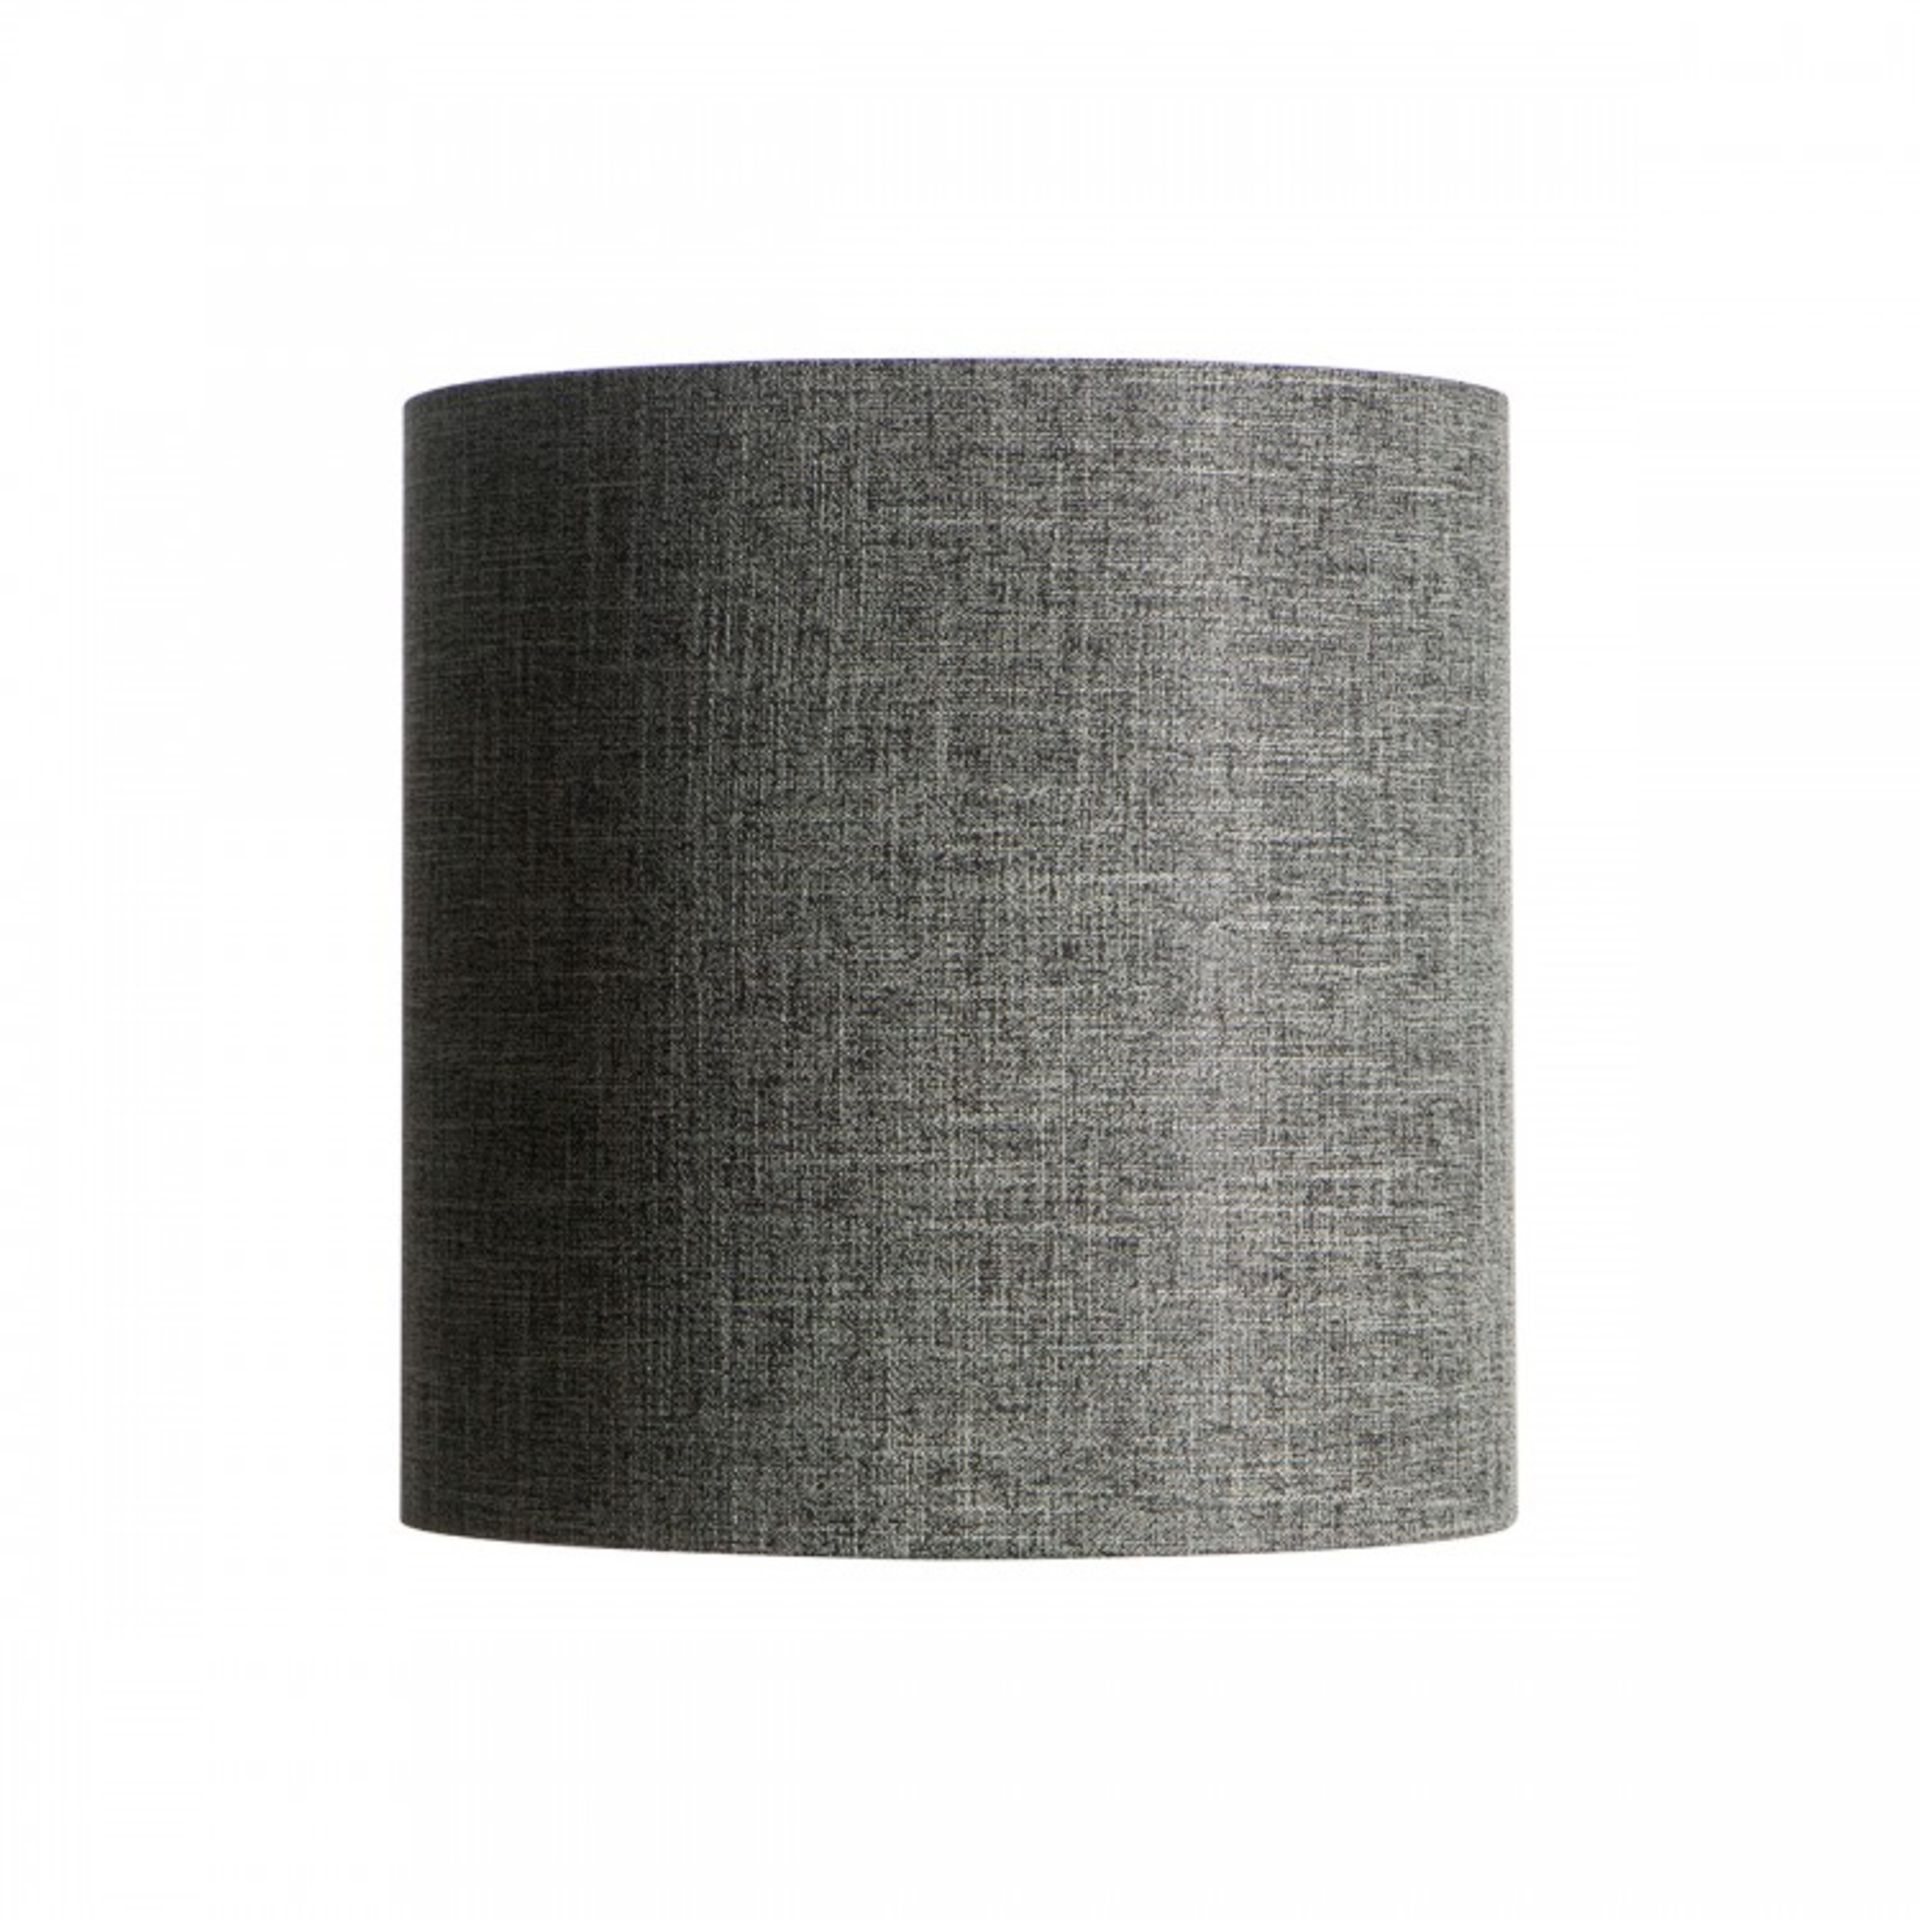 Alessia Shade This pillar style lamp shade has a modern and universal speckled grey colour.